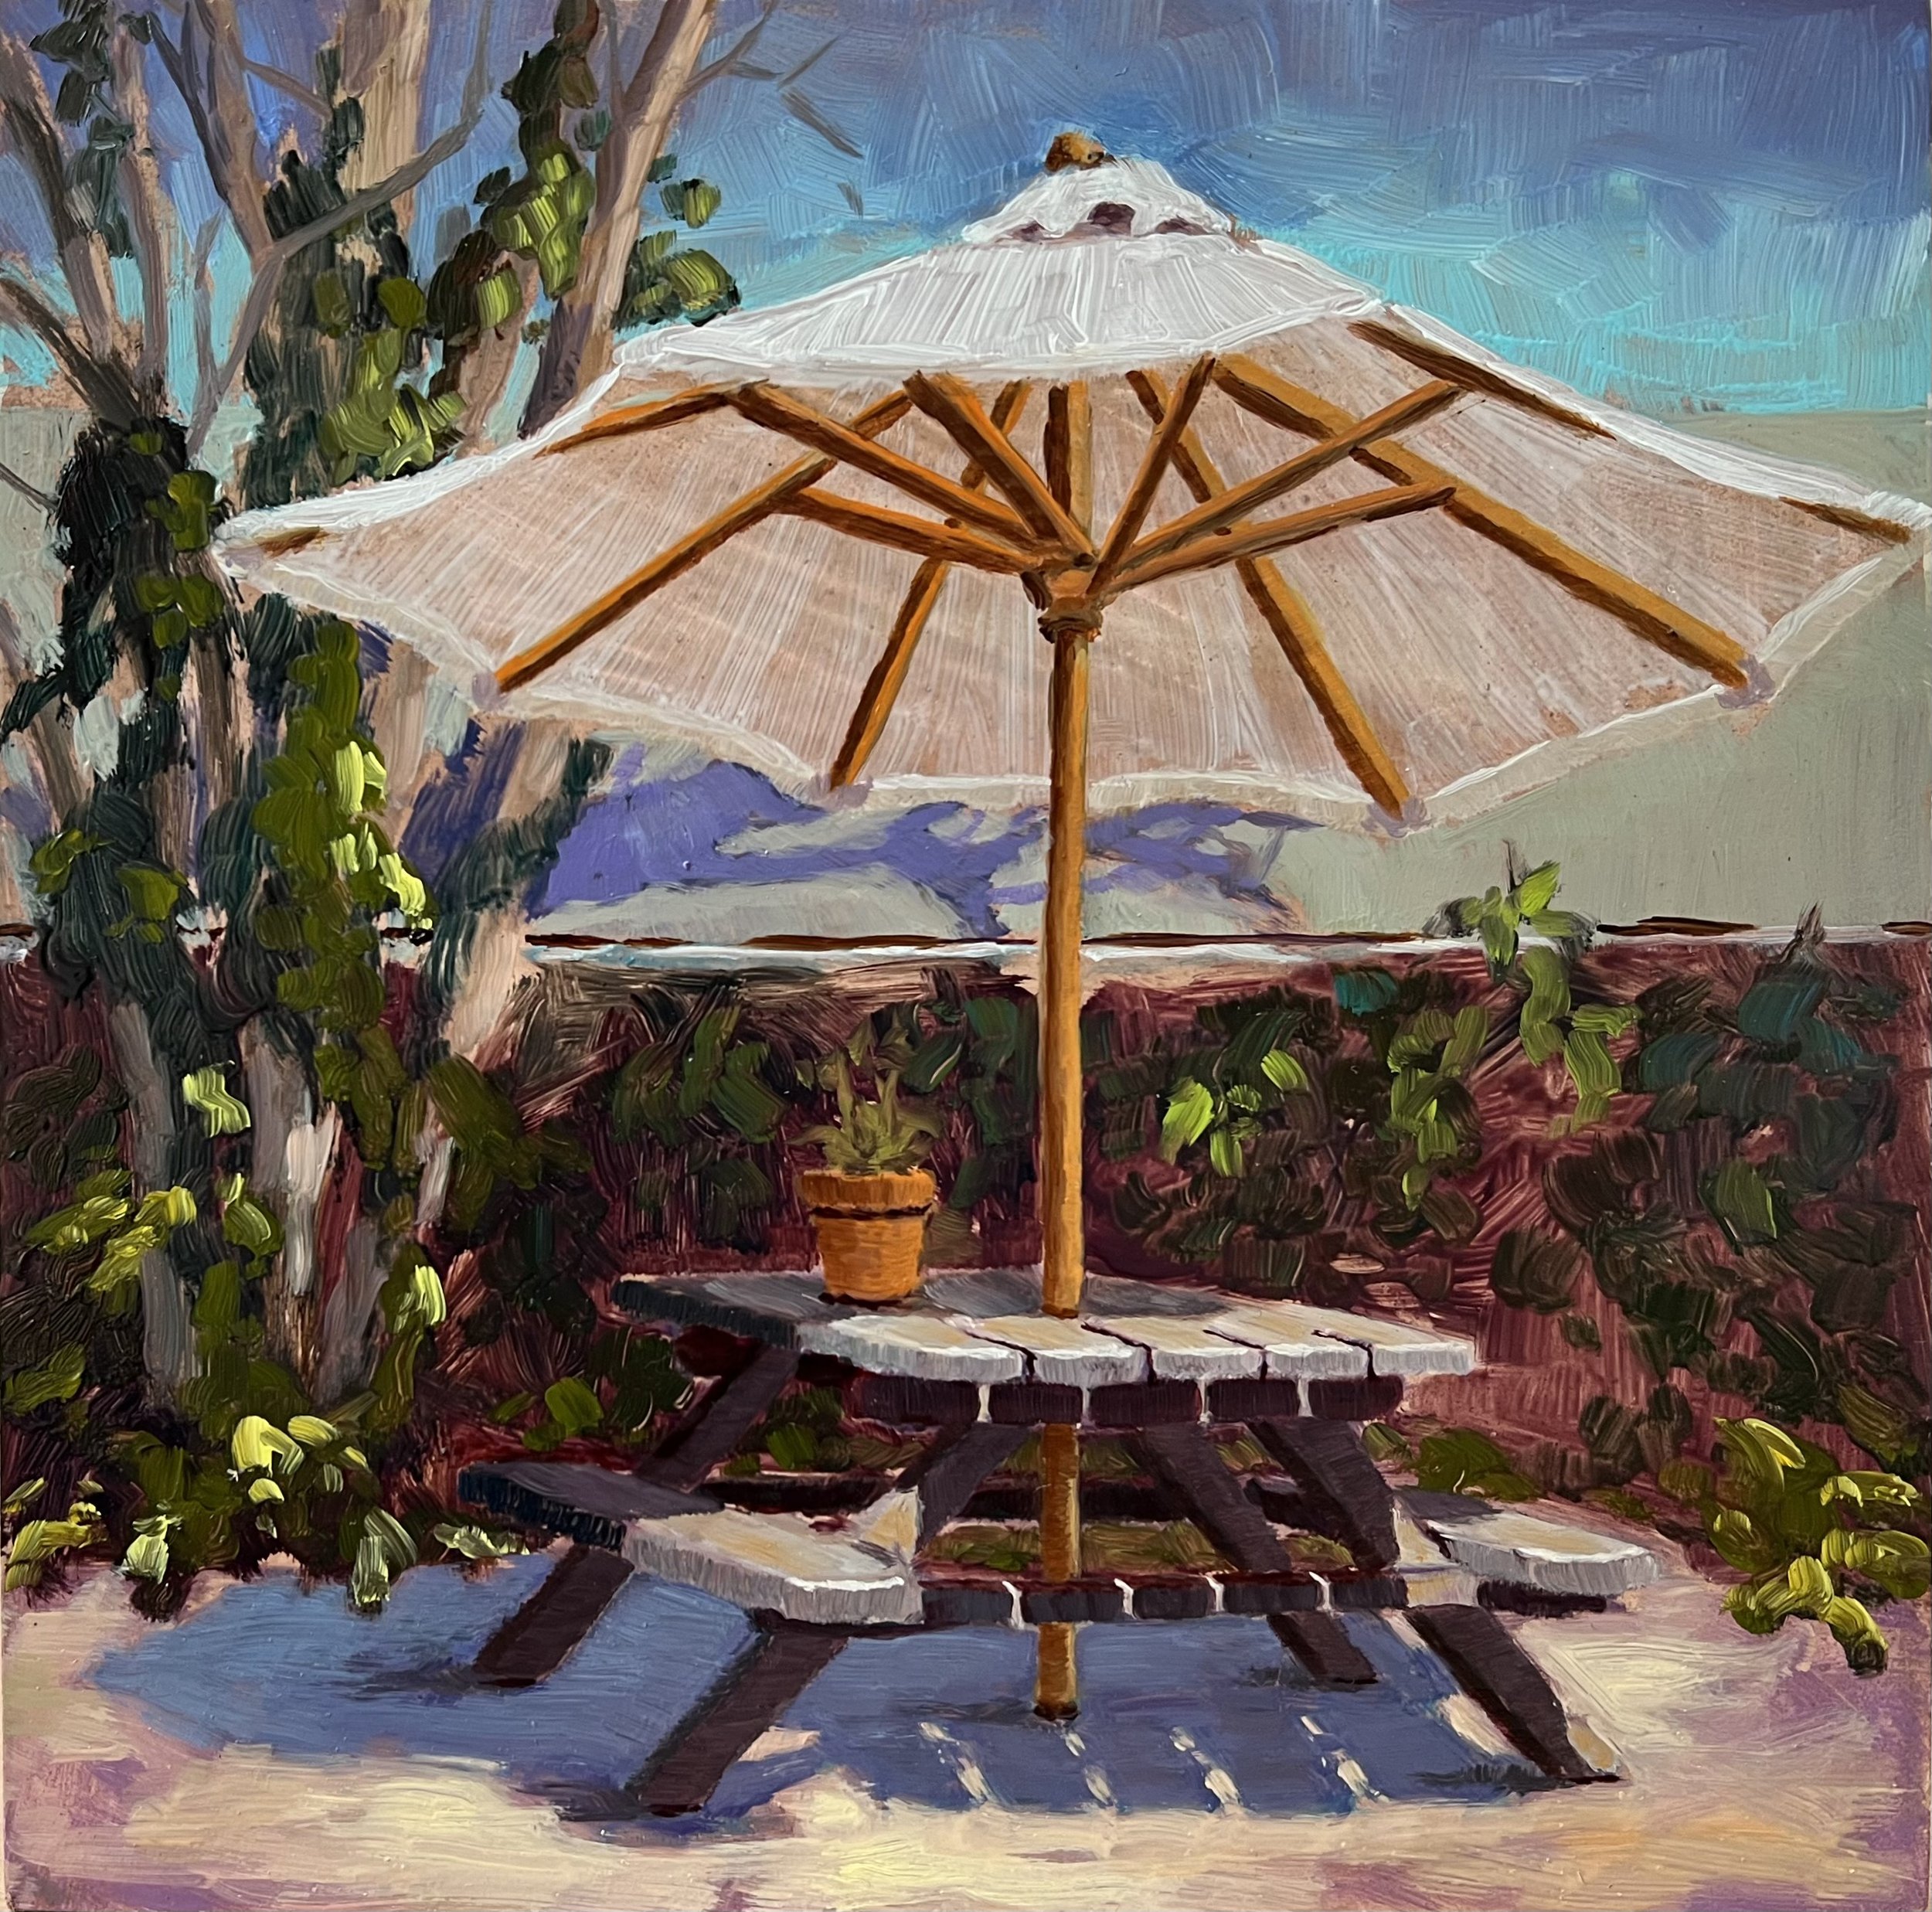 Picnic Table with Umbrella by Maura Carta